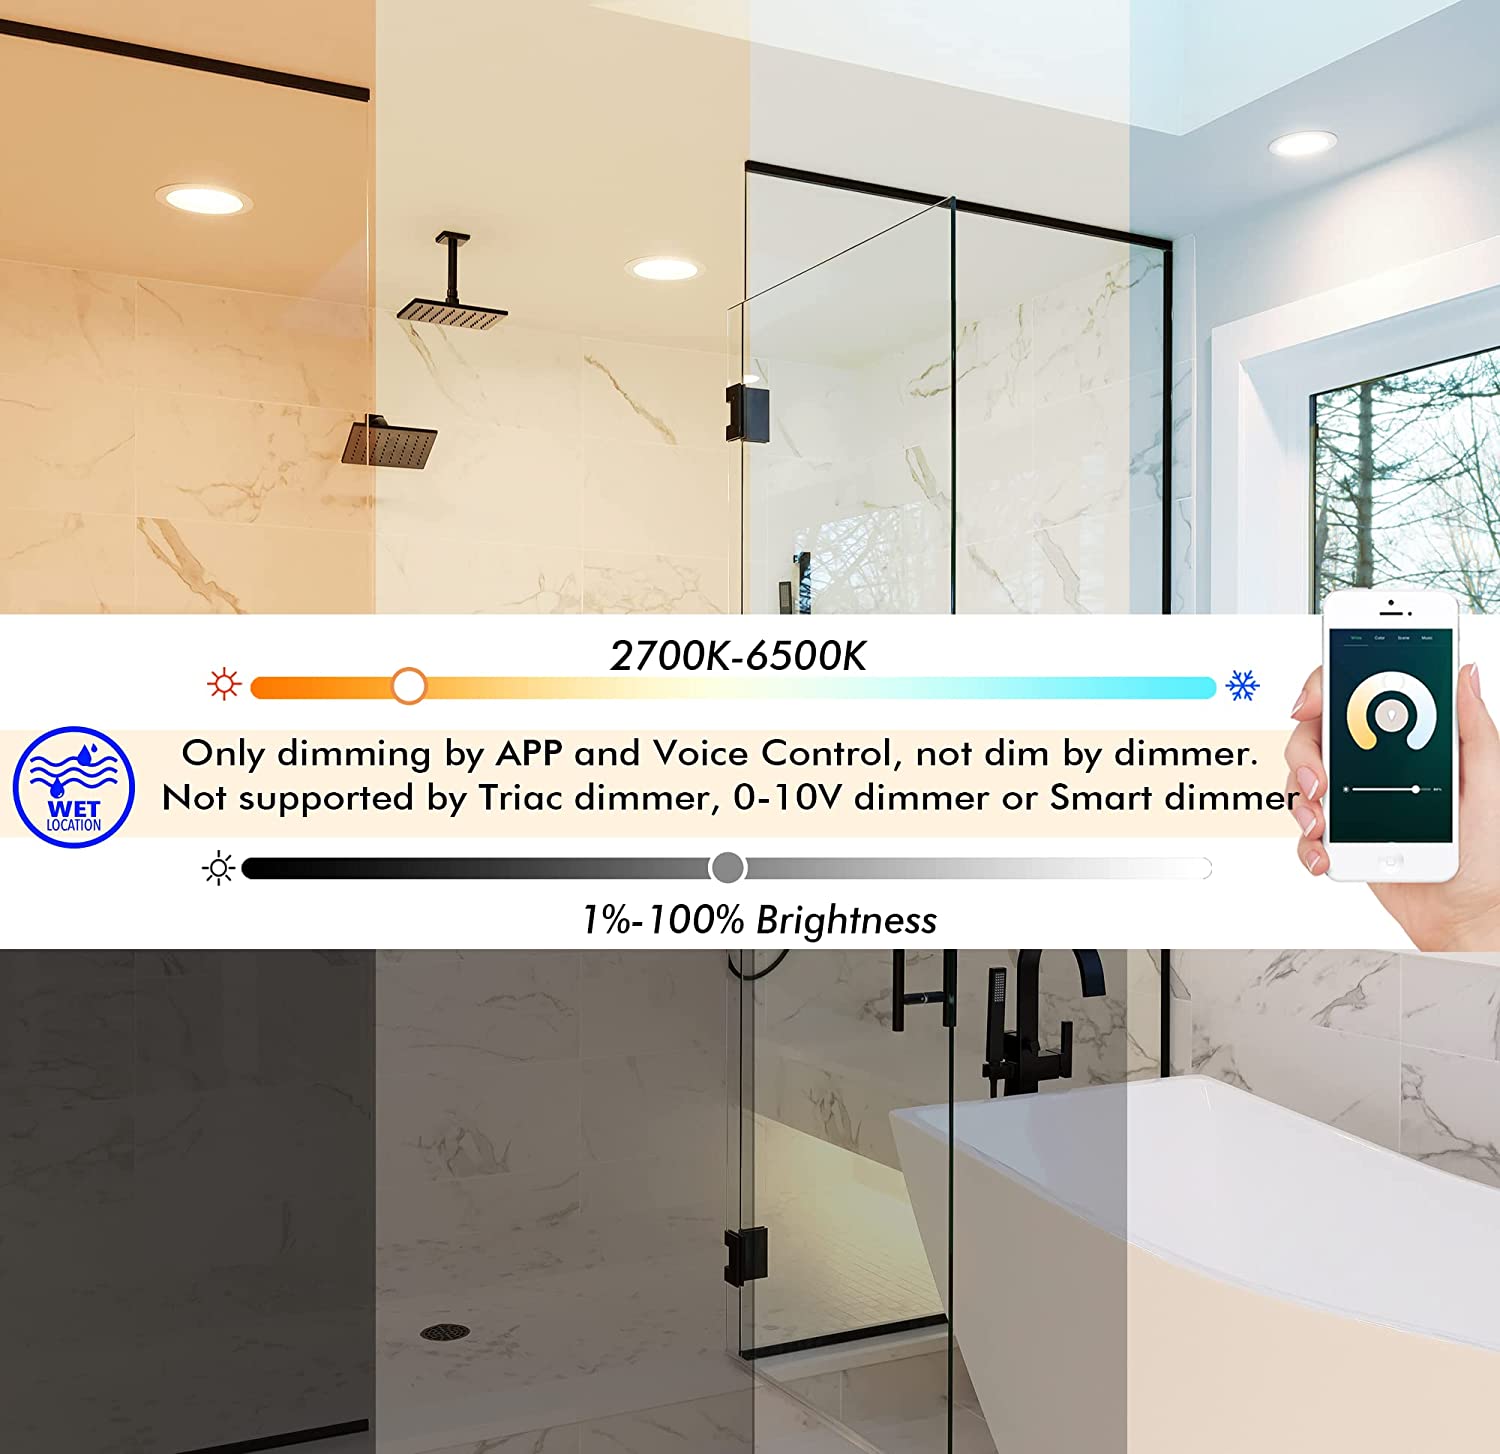 Smart Wifi Ultra Thin LED Recessed Light with Junction Box, 8 Inch,RGB CW Color Changing, Compatible with Alexa and Google Home Assistant, 2700K-6500K, CRI90+, Type IC, WET Location